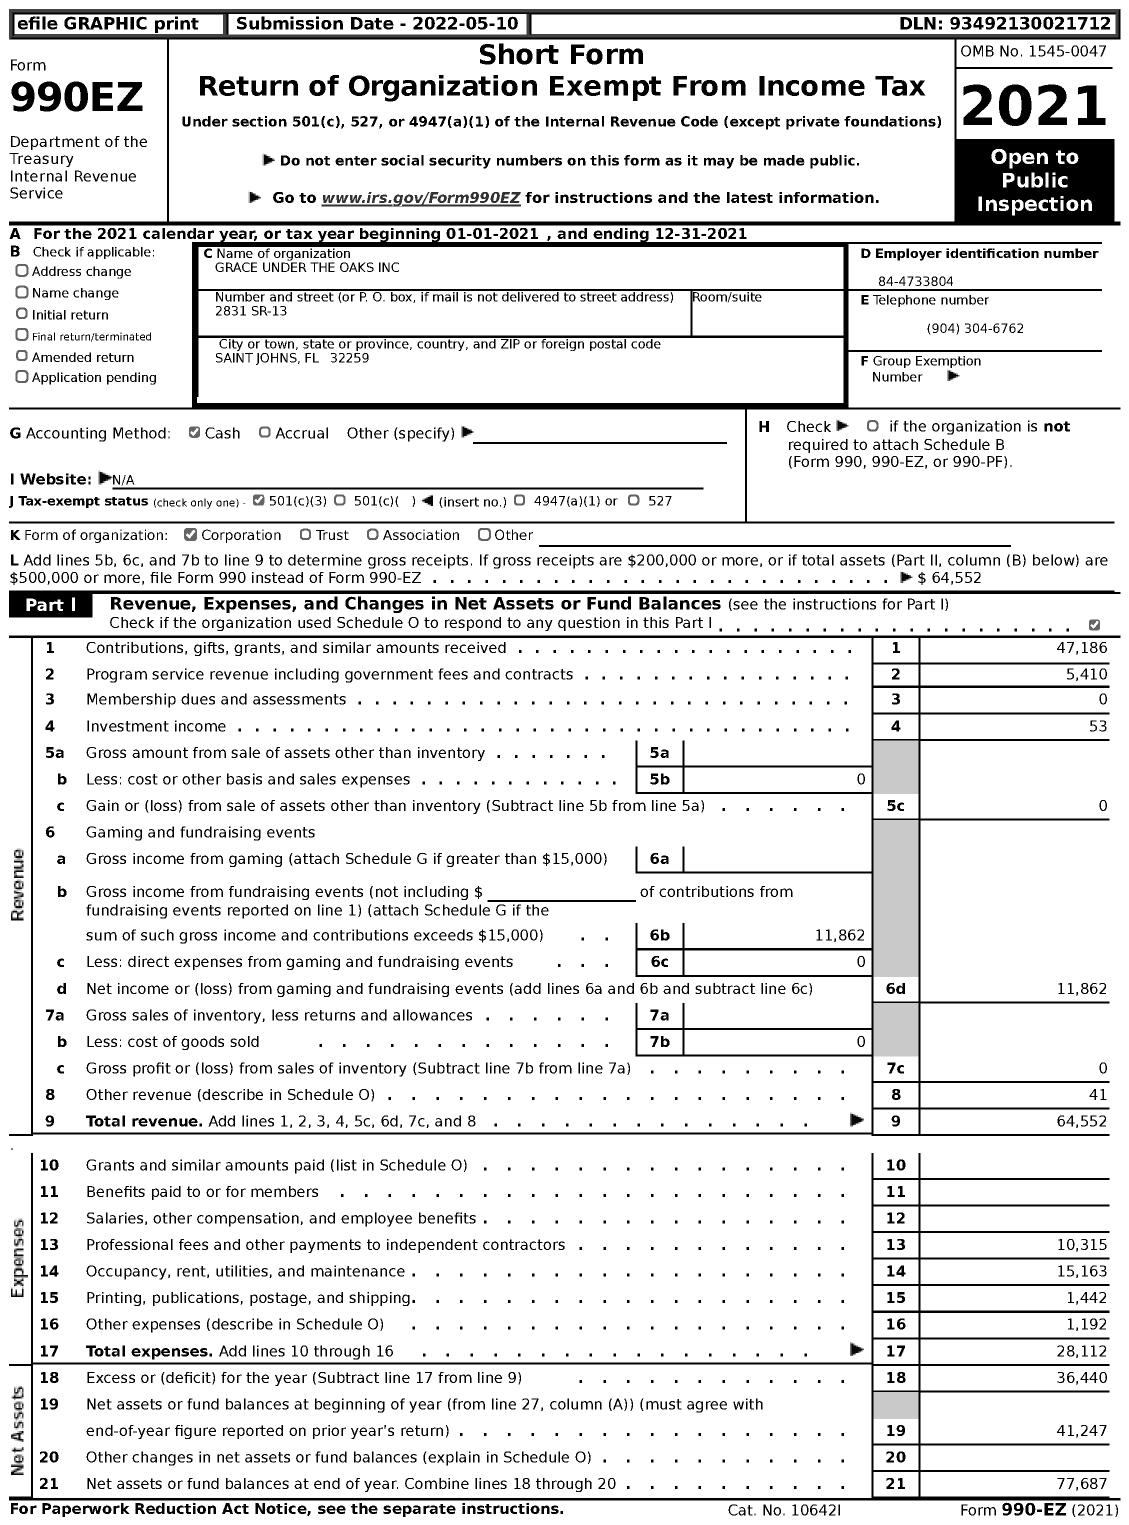 Image of first page of 2021 Form 990EZ for Grace Under the Oaks